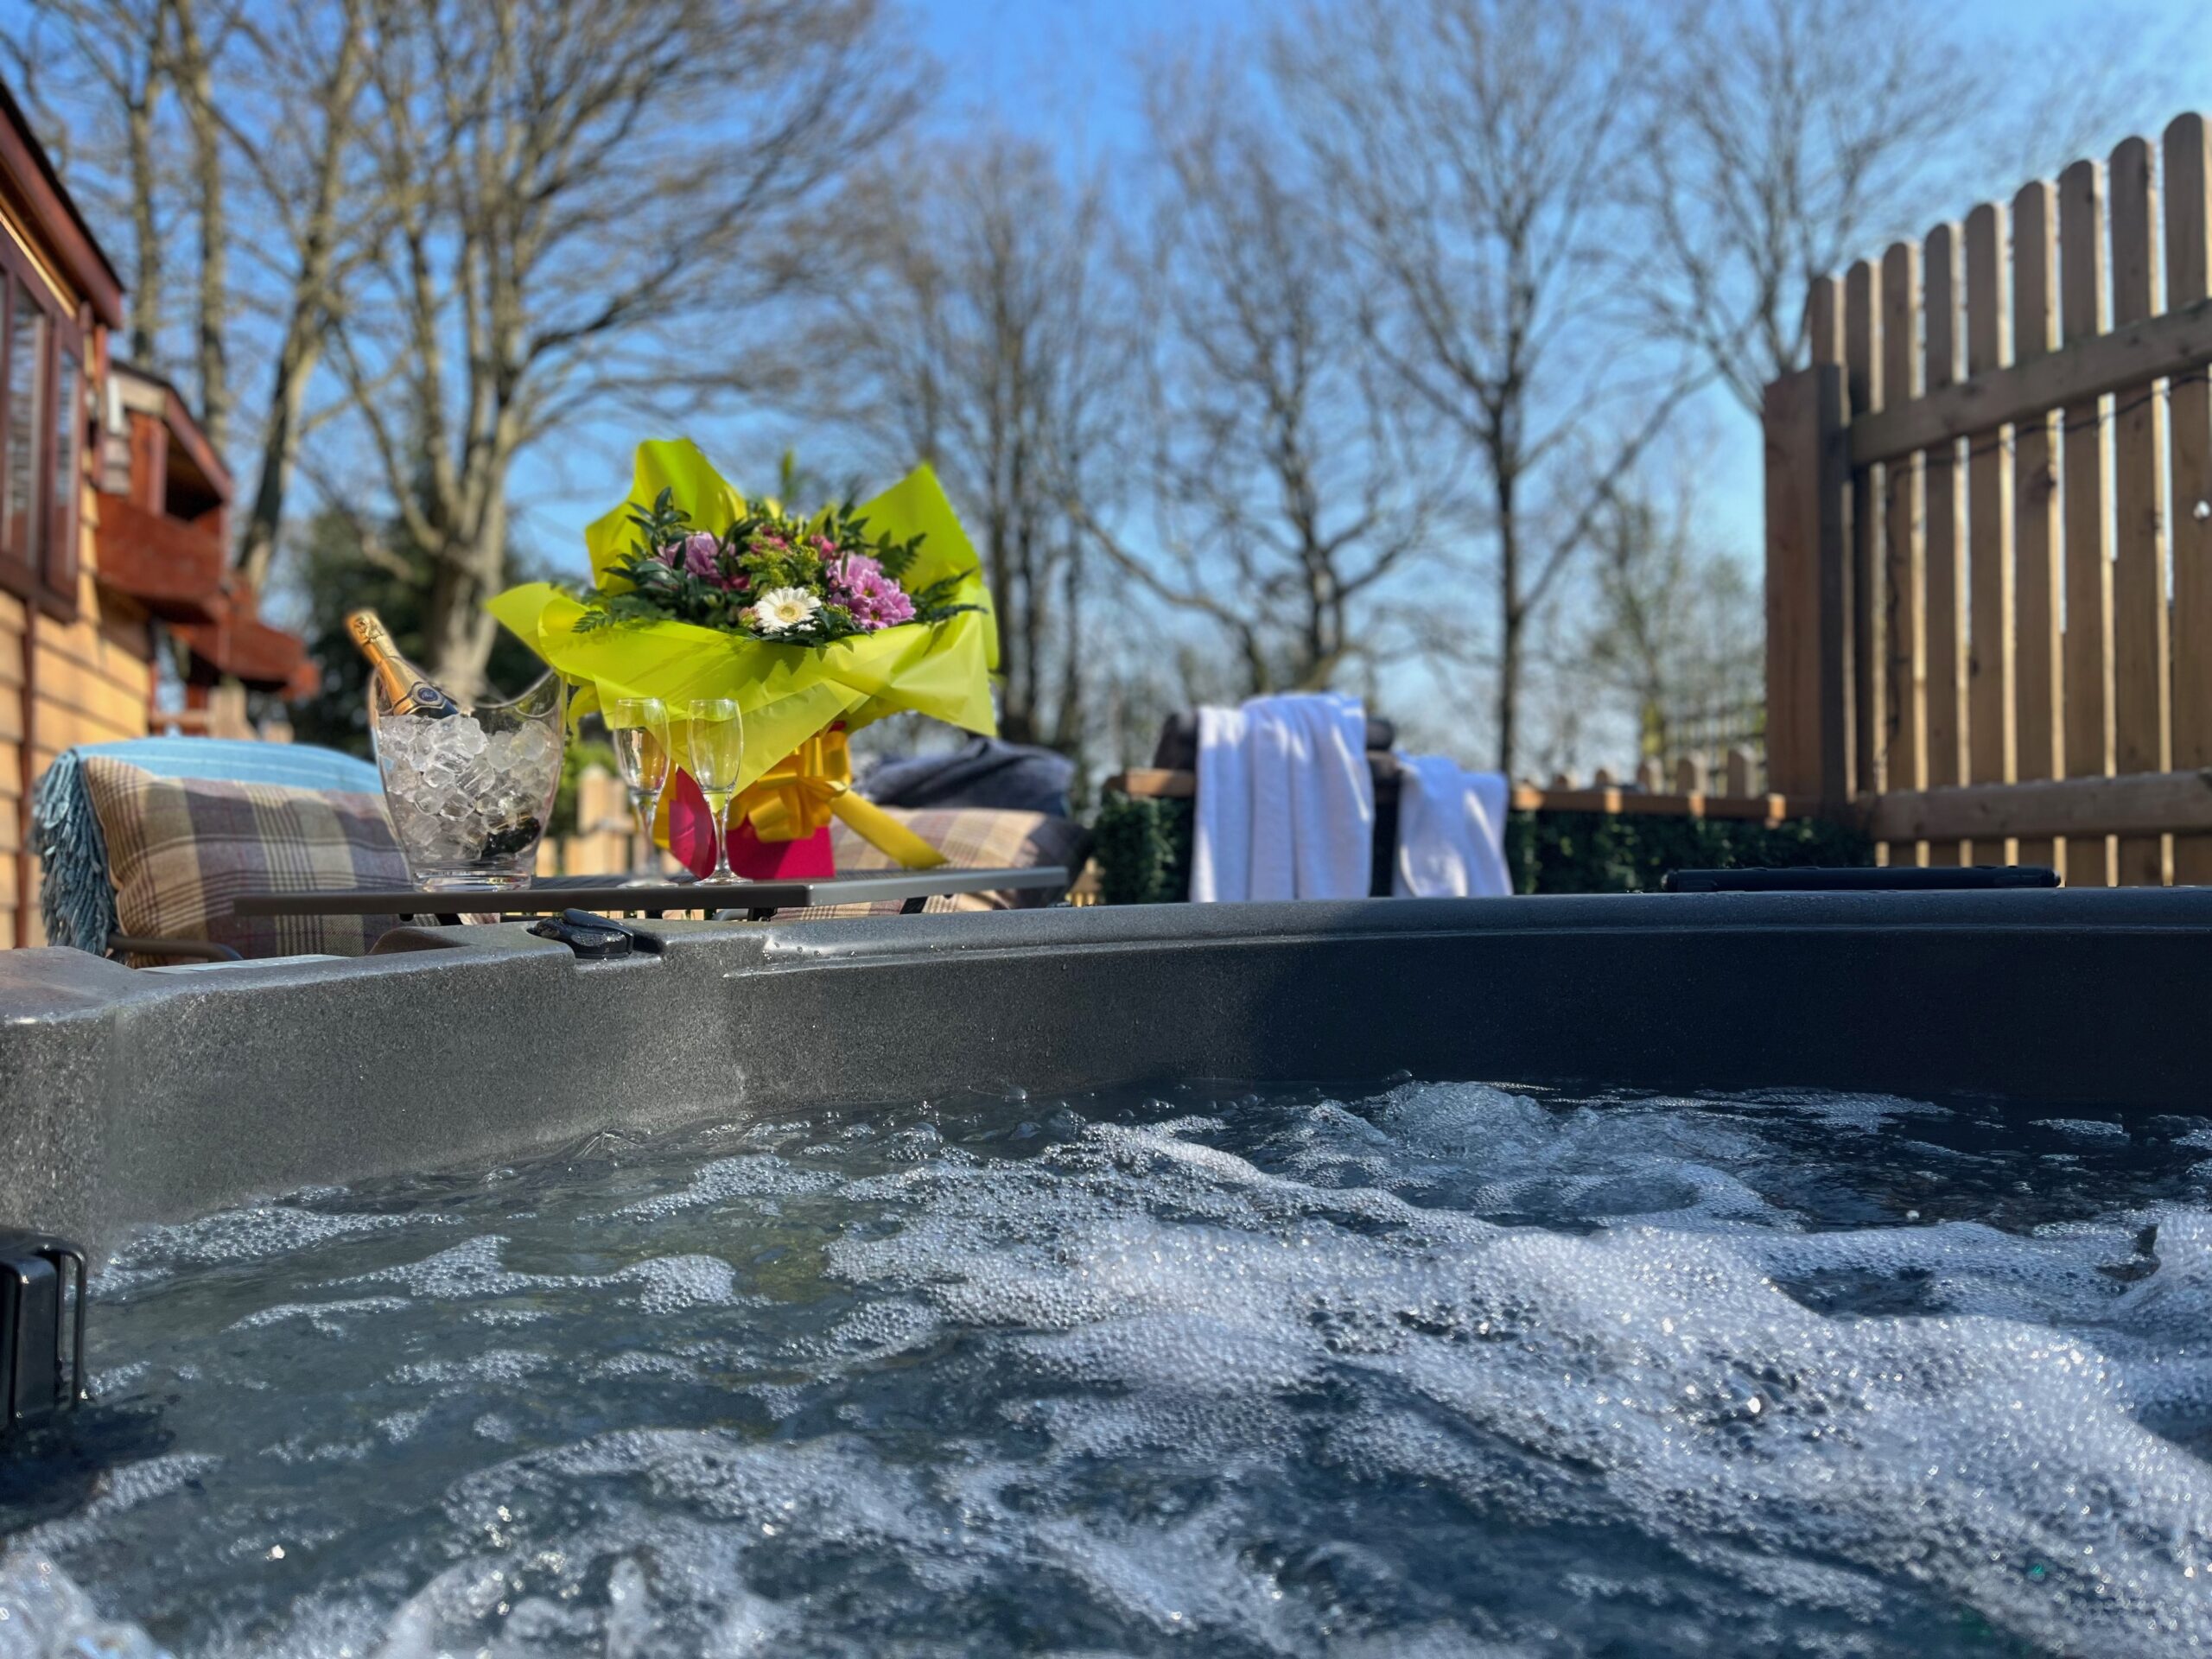 Bubbling hot tub on a sunny day, with champagne on ice and hand-tied bouquet in the background.